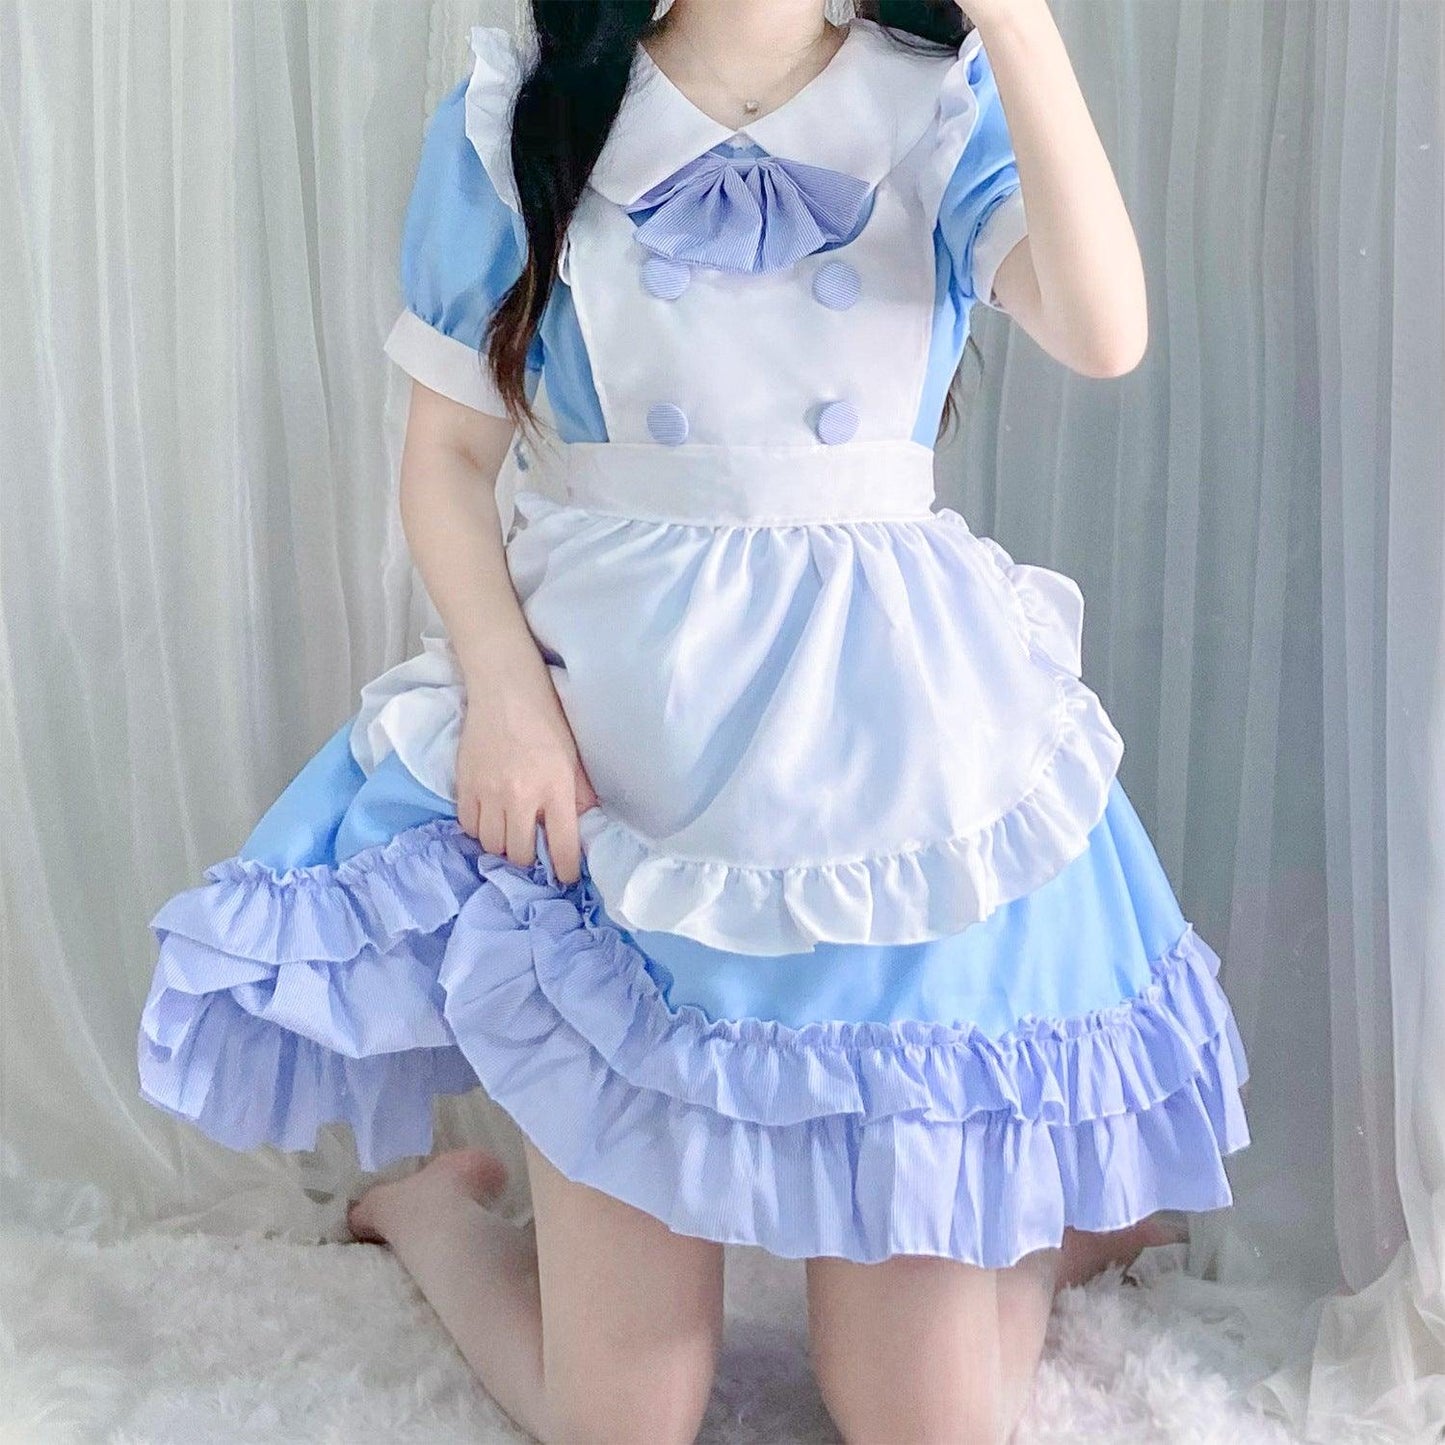 Light Blue White Anime Maid Outfit Lolita Dress Japanese Cute Fancy Dress Cosplay Costume